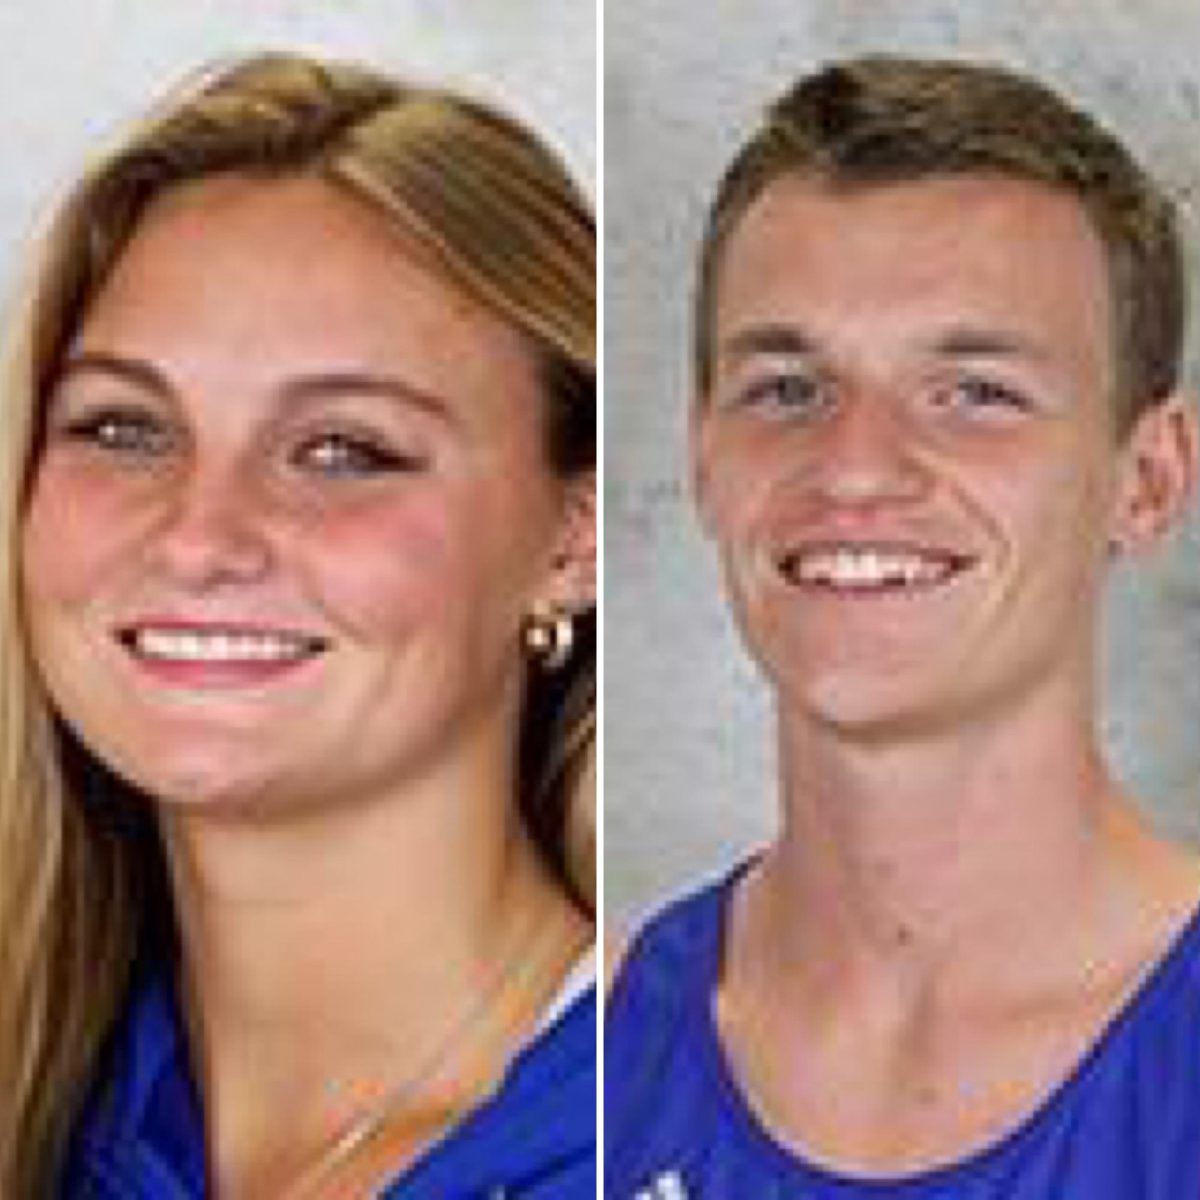 Panthers of the Week (10.15)
Autumn Grinter and Joe Stoddard